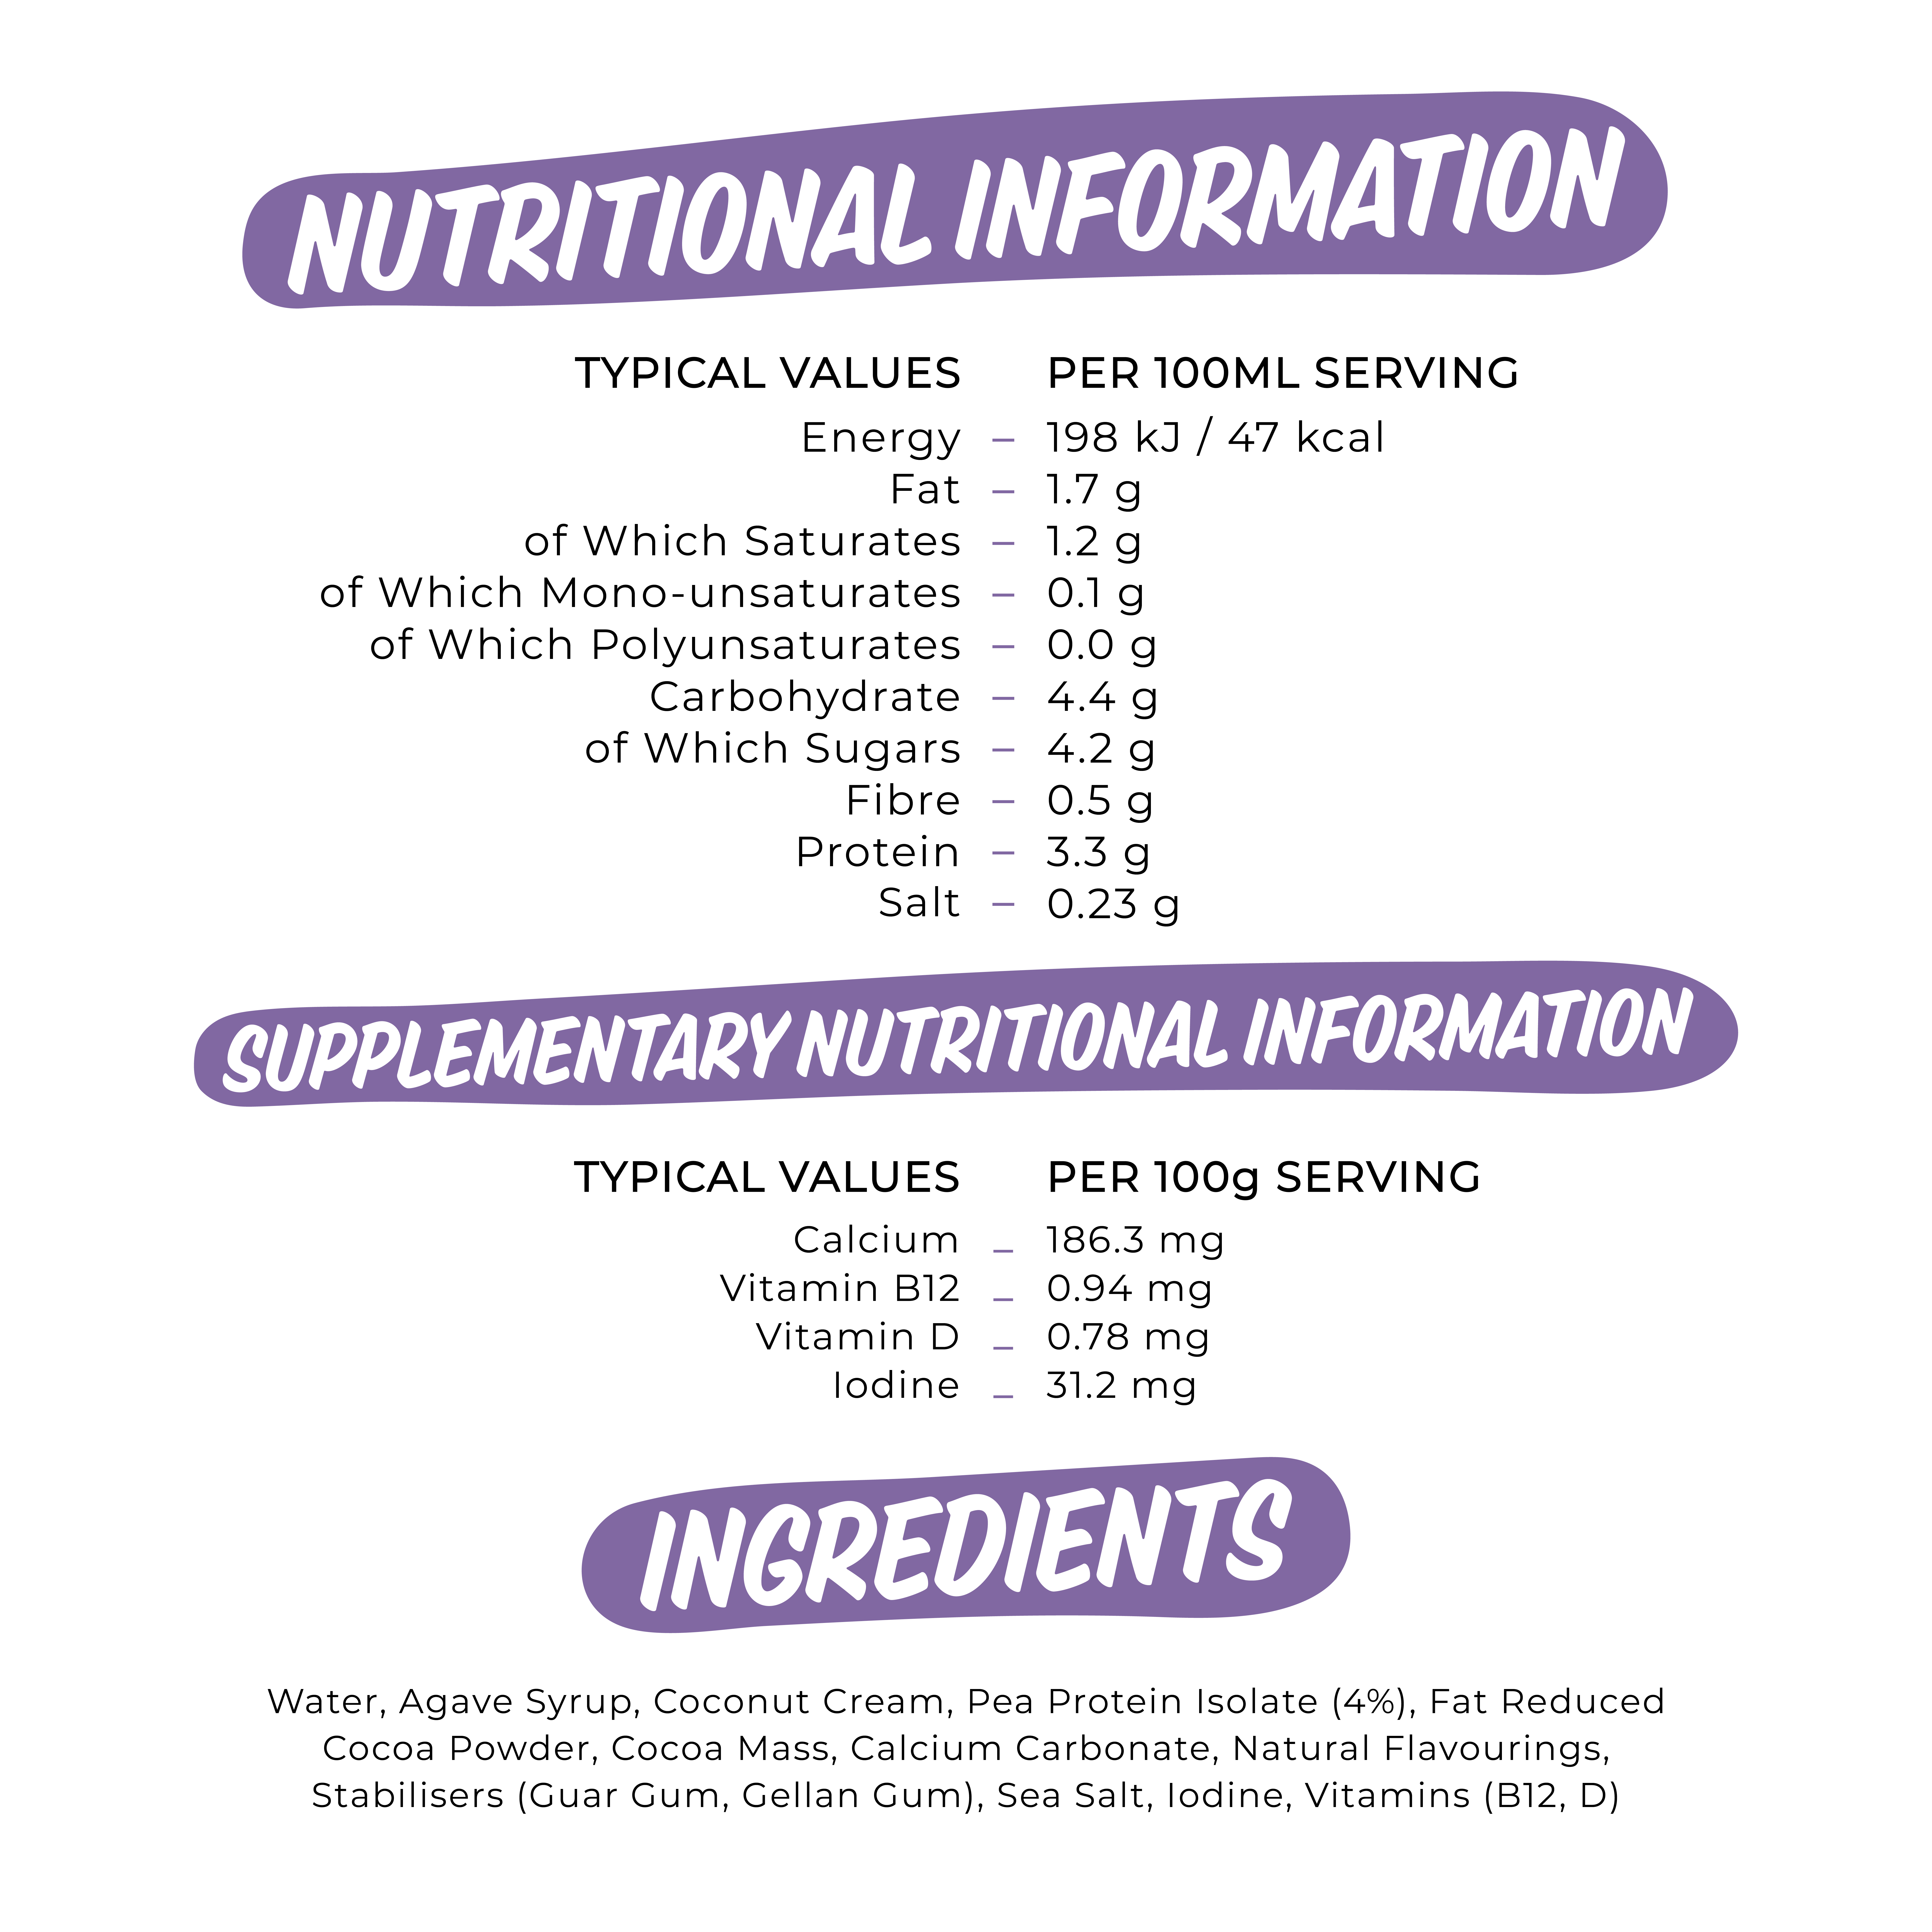 TYPICAL VALUES PER 100ML SERVING Energy 198 kJ / 47 kcal Fat 1.7 g of Which Saturates 1.2 g of Which Mono-unsaturates 0.1 g of Which Polyunsaturates 0.0 g Carbohydrate 4.4 g of Which Sugars 4.2 g Fibre 0.5 g Protein 3.3 g Salt 0.23 g 
                          SUPPLEMENTARY NUTRITIONAL INFORMATION TYPICAL VALUES PER 100g SERVING Calcium 186.3 mg Vitamin B12 0.94 mg Vitamin D 0.78 mg Iodine 31.2 mg 
                          Water, Agave Syrup, Coconut Cream, Pea Protein Isolate (4%), Fat Reduced Cocoa Powder, Cocoa Mass, Calcium Carbonate, Natural Flavourings, Stabilisers (Guar Gum, Gellan Gum), Sea Salt, Iodine, Vitamins (B12, D) 

                          